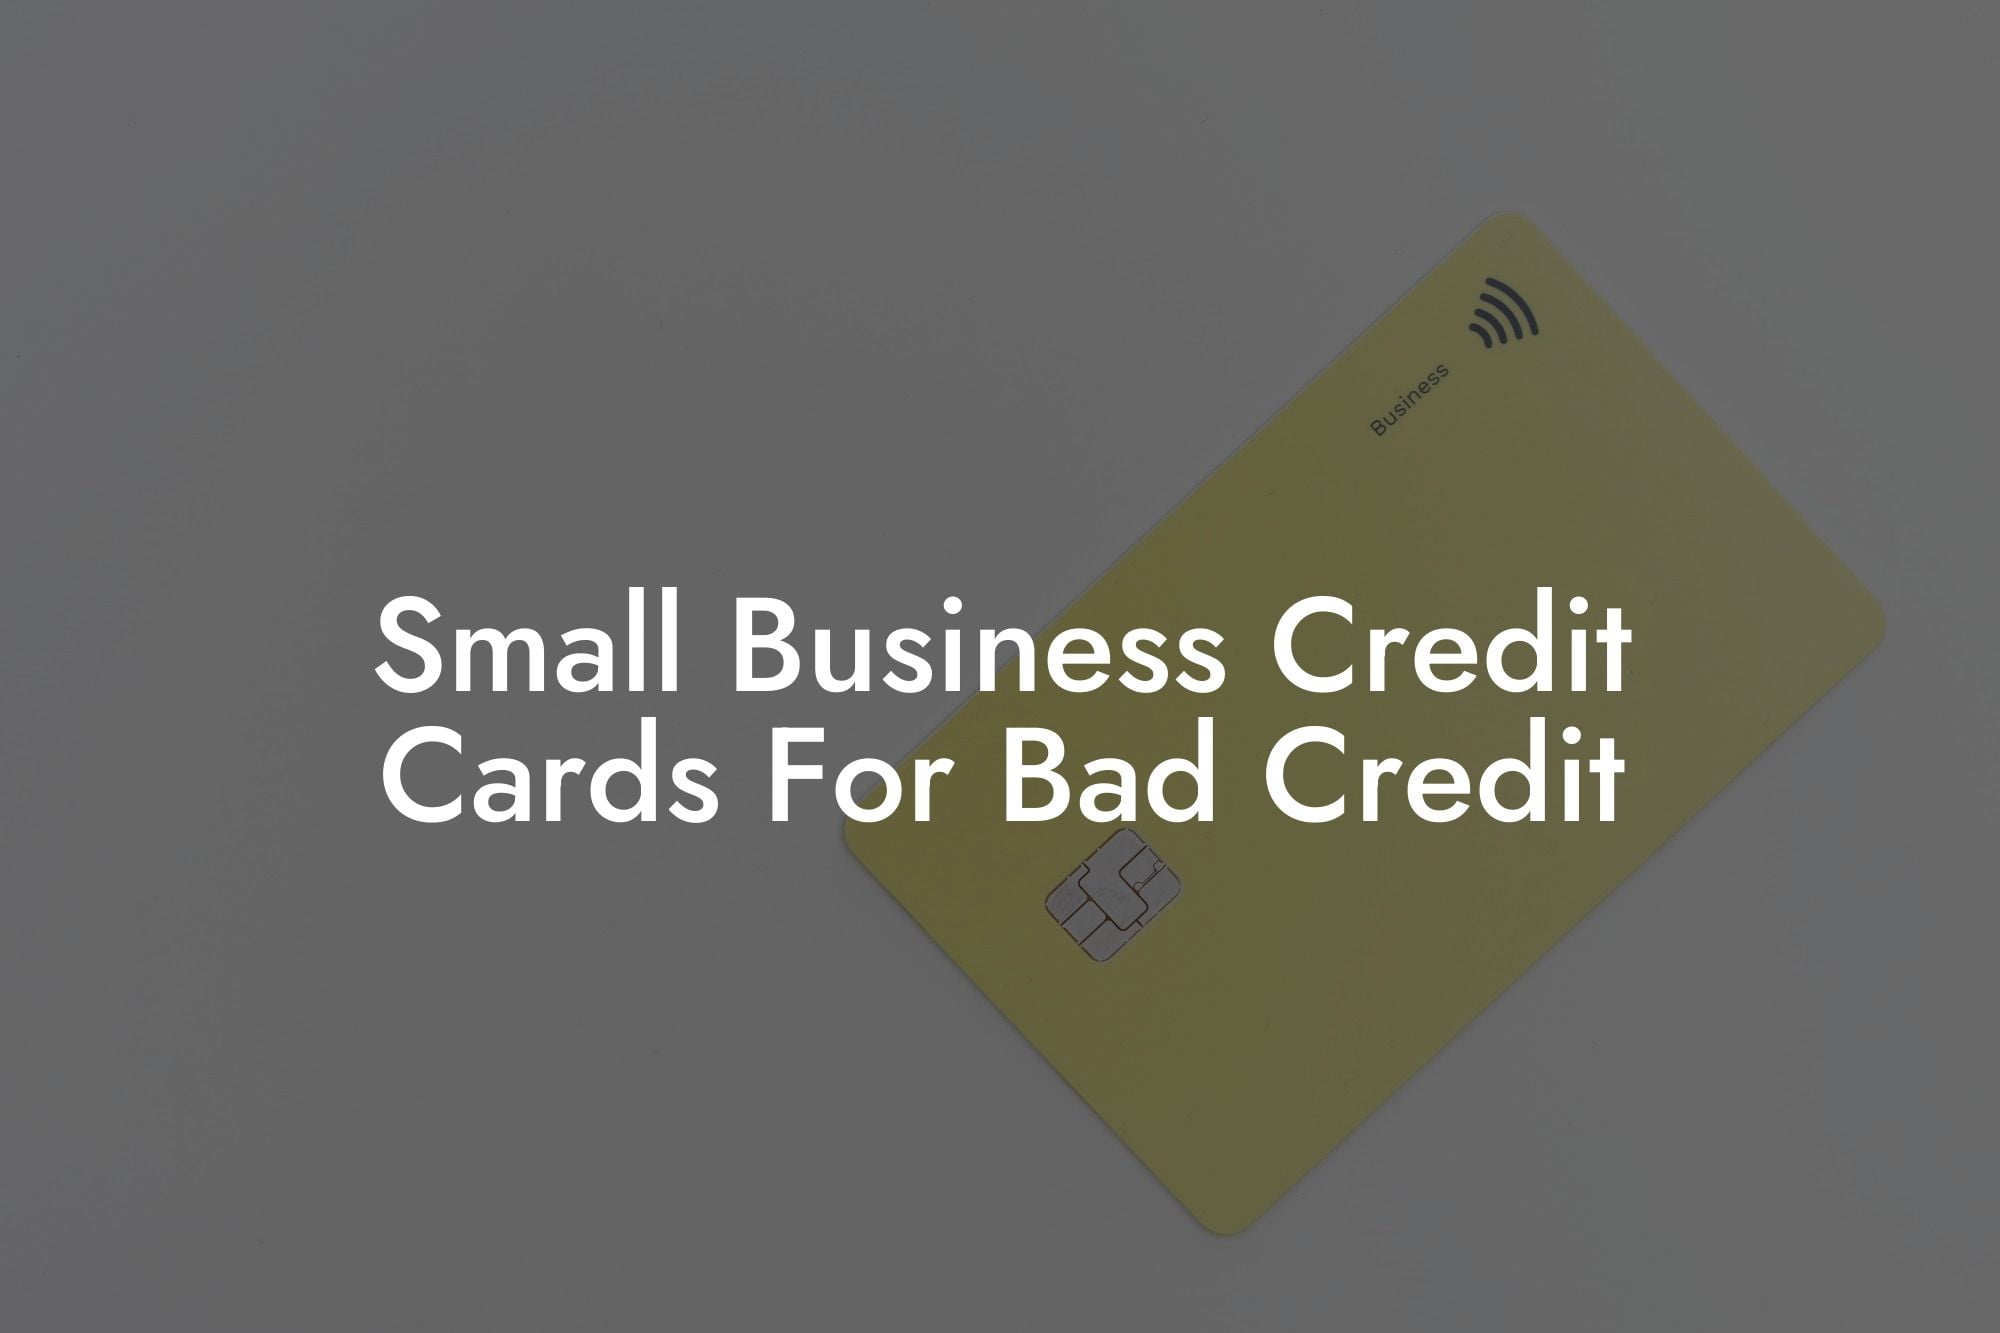 Small Business Credit Cards For Bad Credit